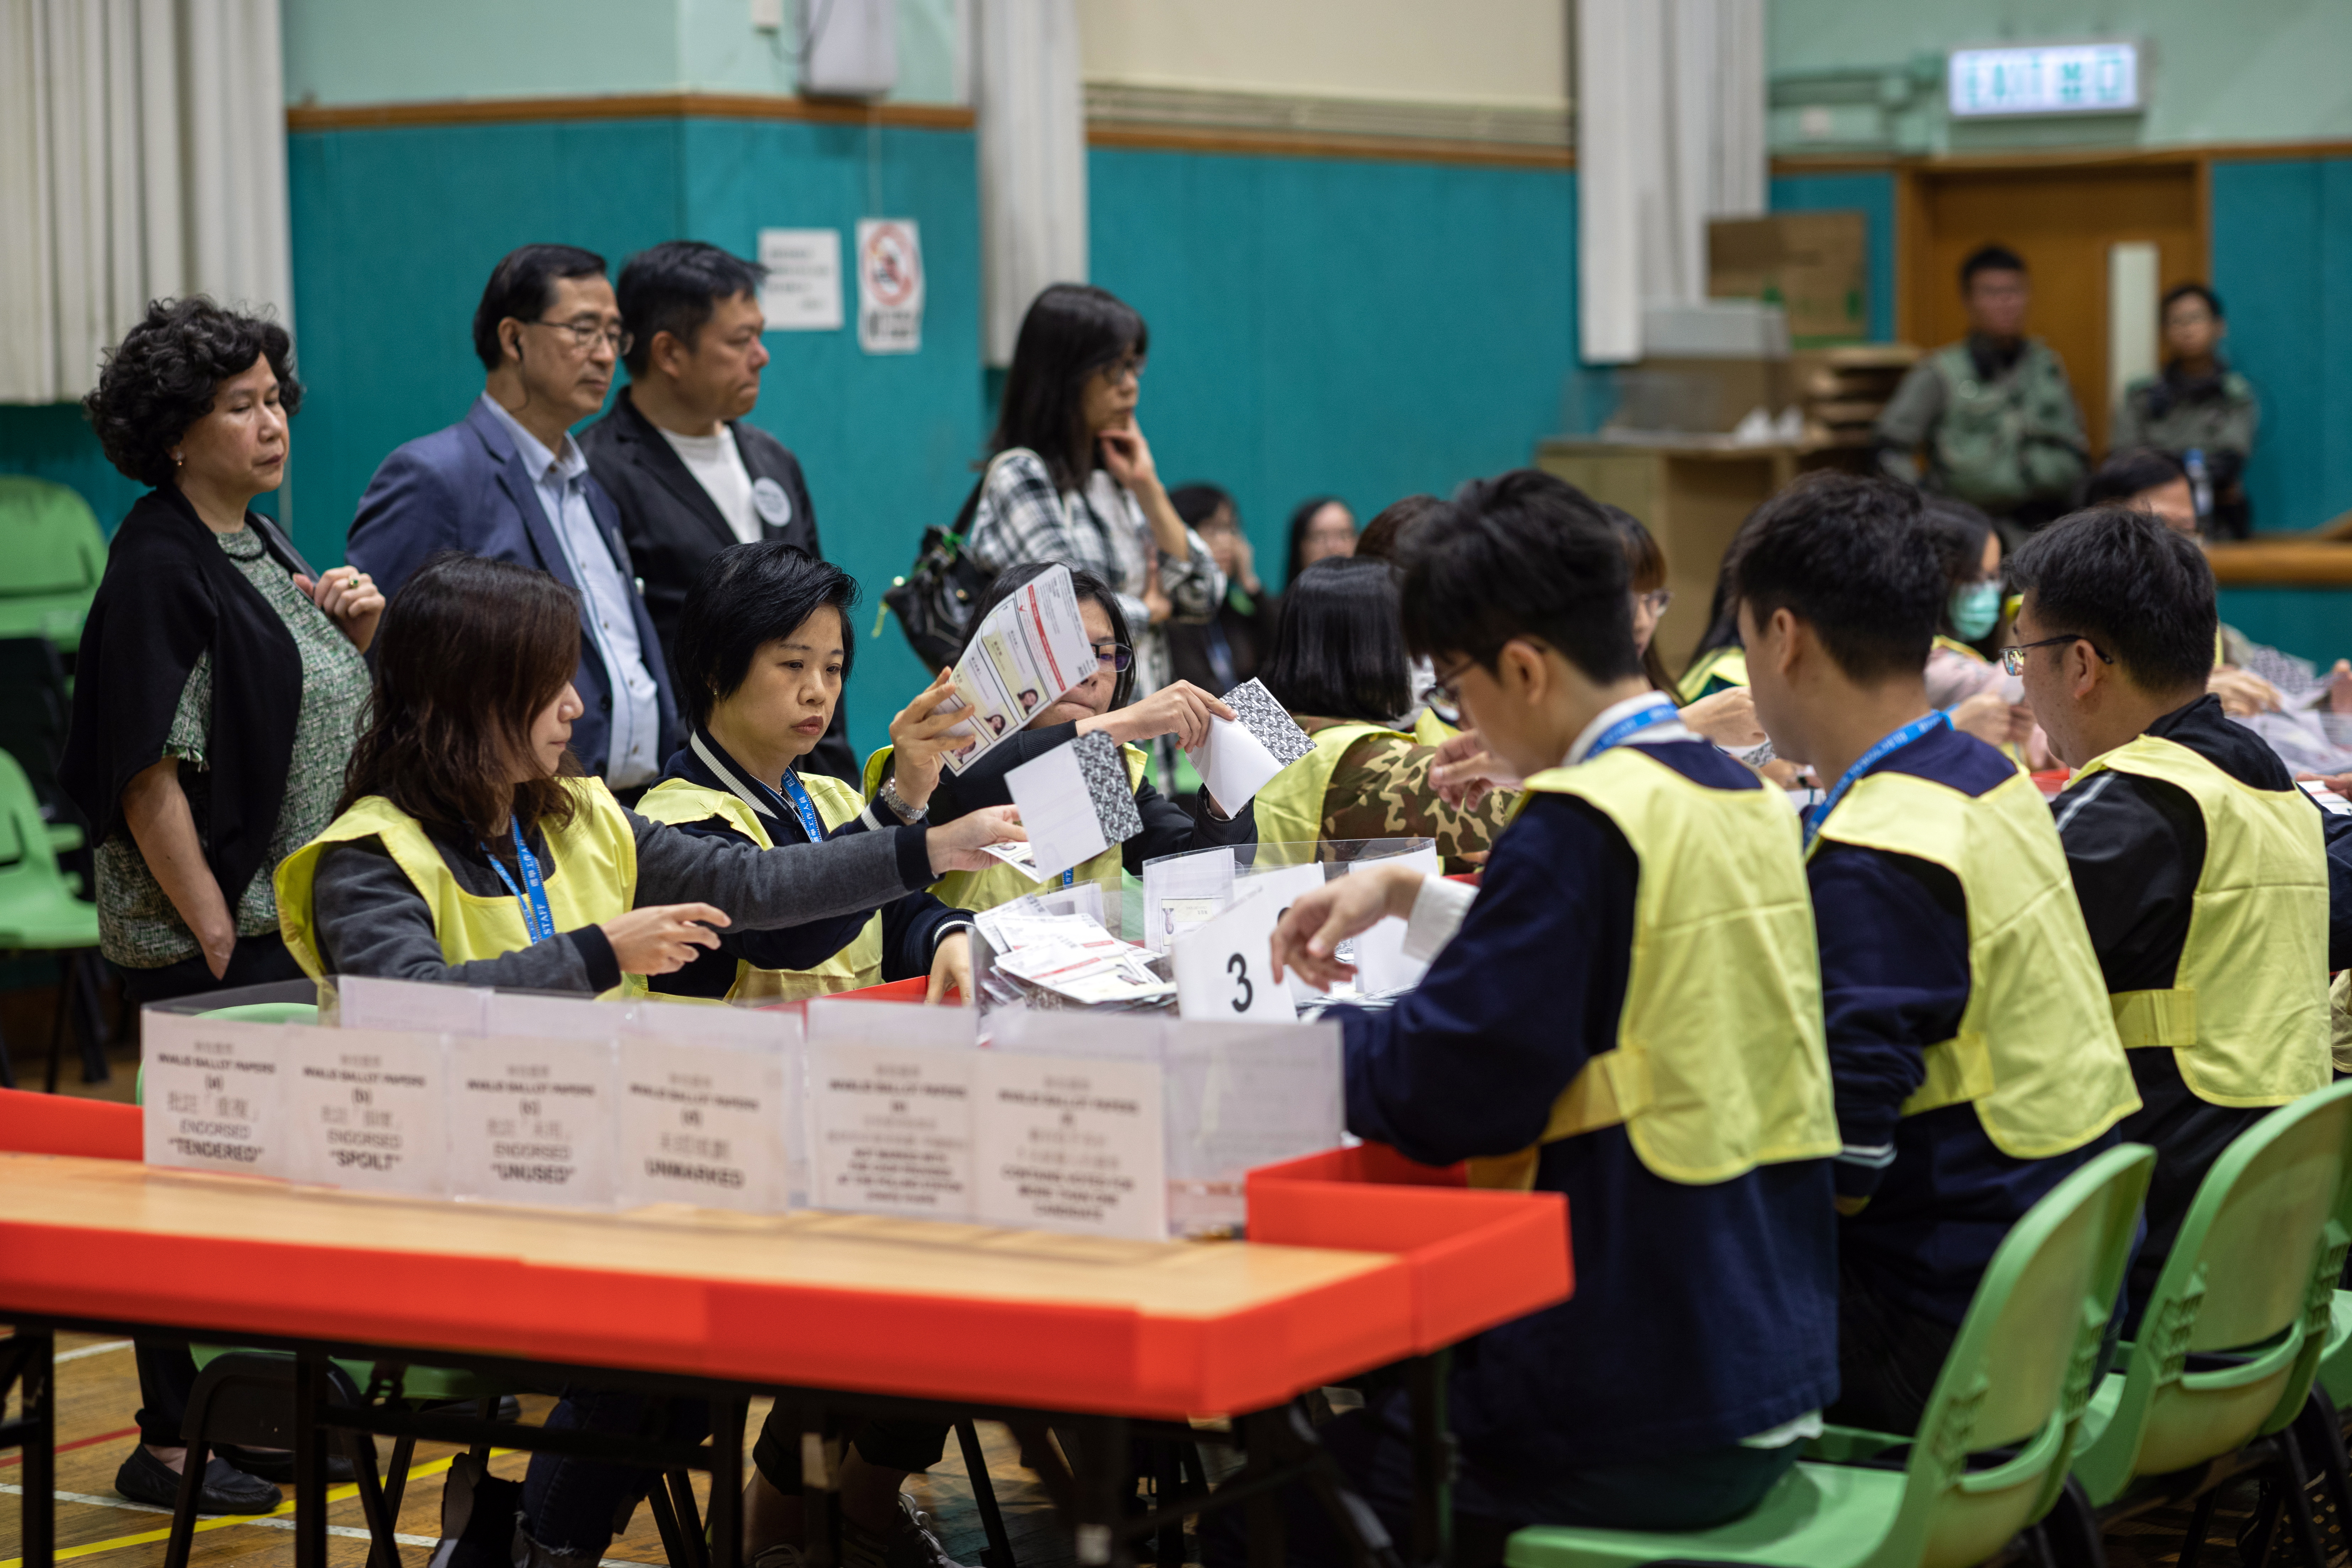 epa08022342 Staff from the Registration and Electoral Office count votes during the District Council Ordinary Election in Hong Kong, China, 24 November 2019. According to reports at least 2.8 million people voted on 24 November in the city's first election since the outbreak of widespread anti-government protests in June 2019.  EPA/JEROME FAVRE